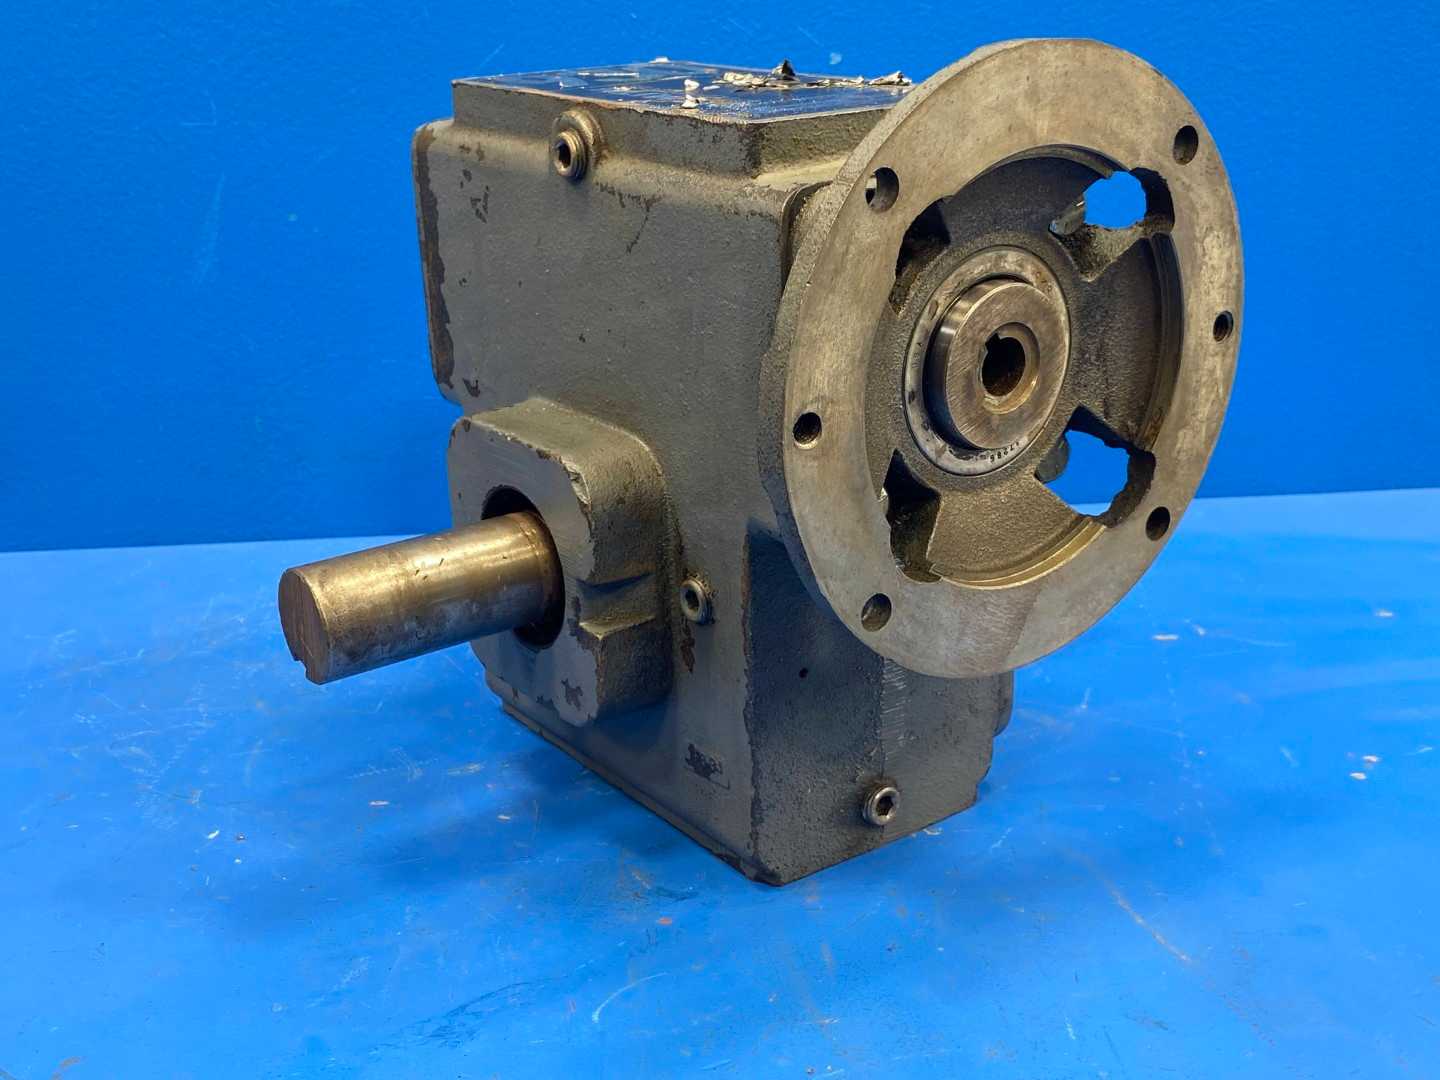 Winsmith 930MWT D-90 Type SE Speed Reducer Ration 30